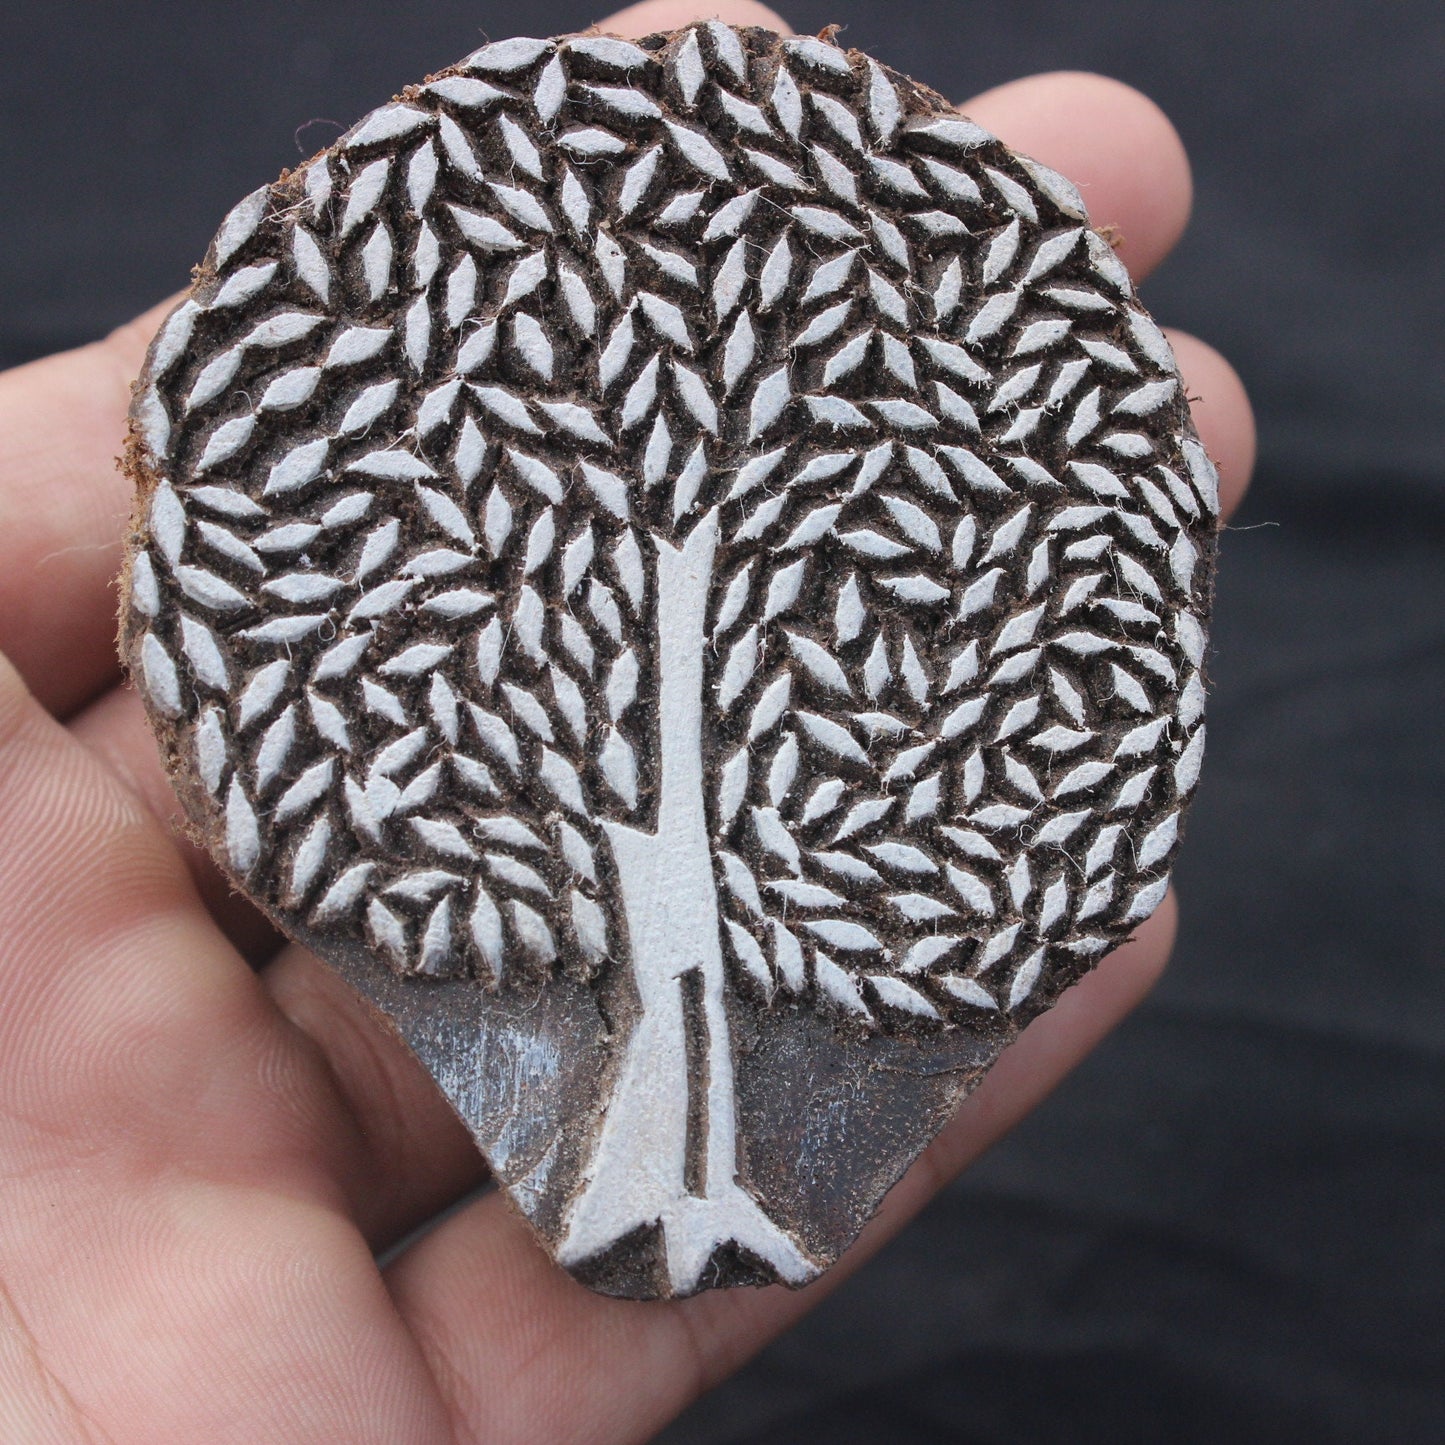 Hand Carve Soap Stamp Tree Of Life Wood Block Print Stamp Tree Print Stamp Indian Block Print Stamp For Printing Carve Wooden Block Stamp